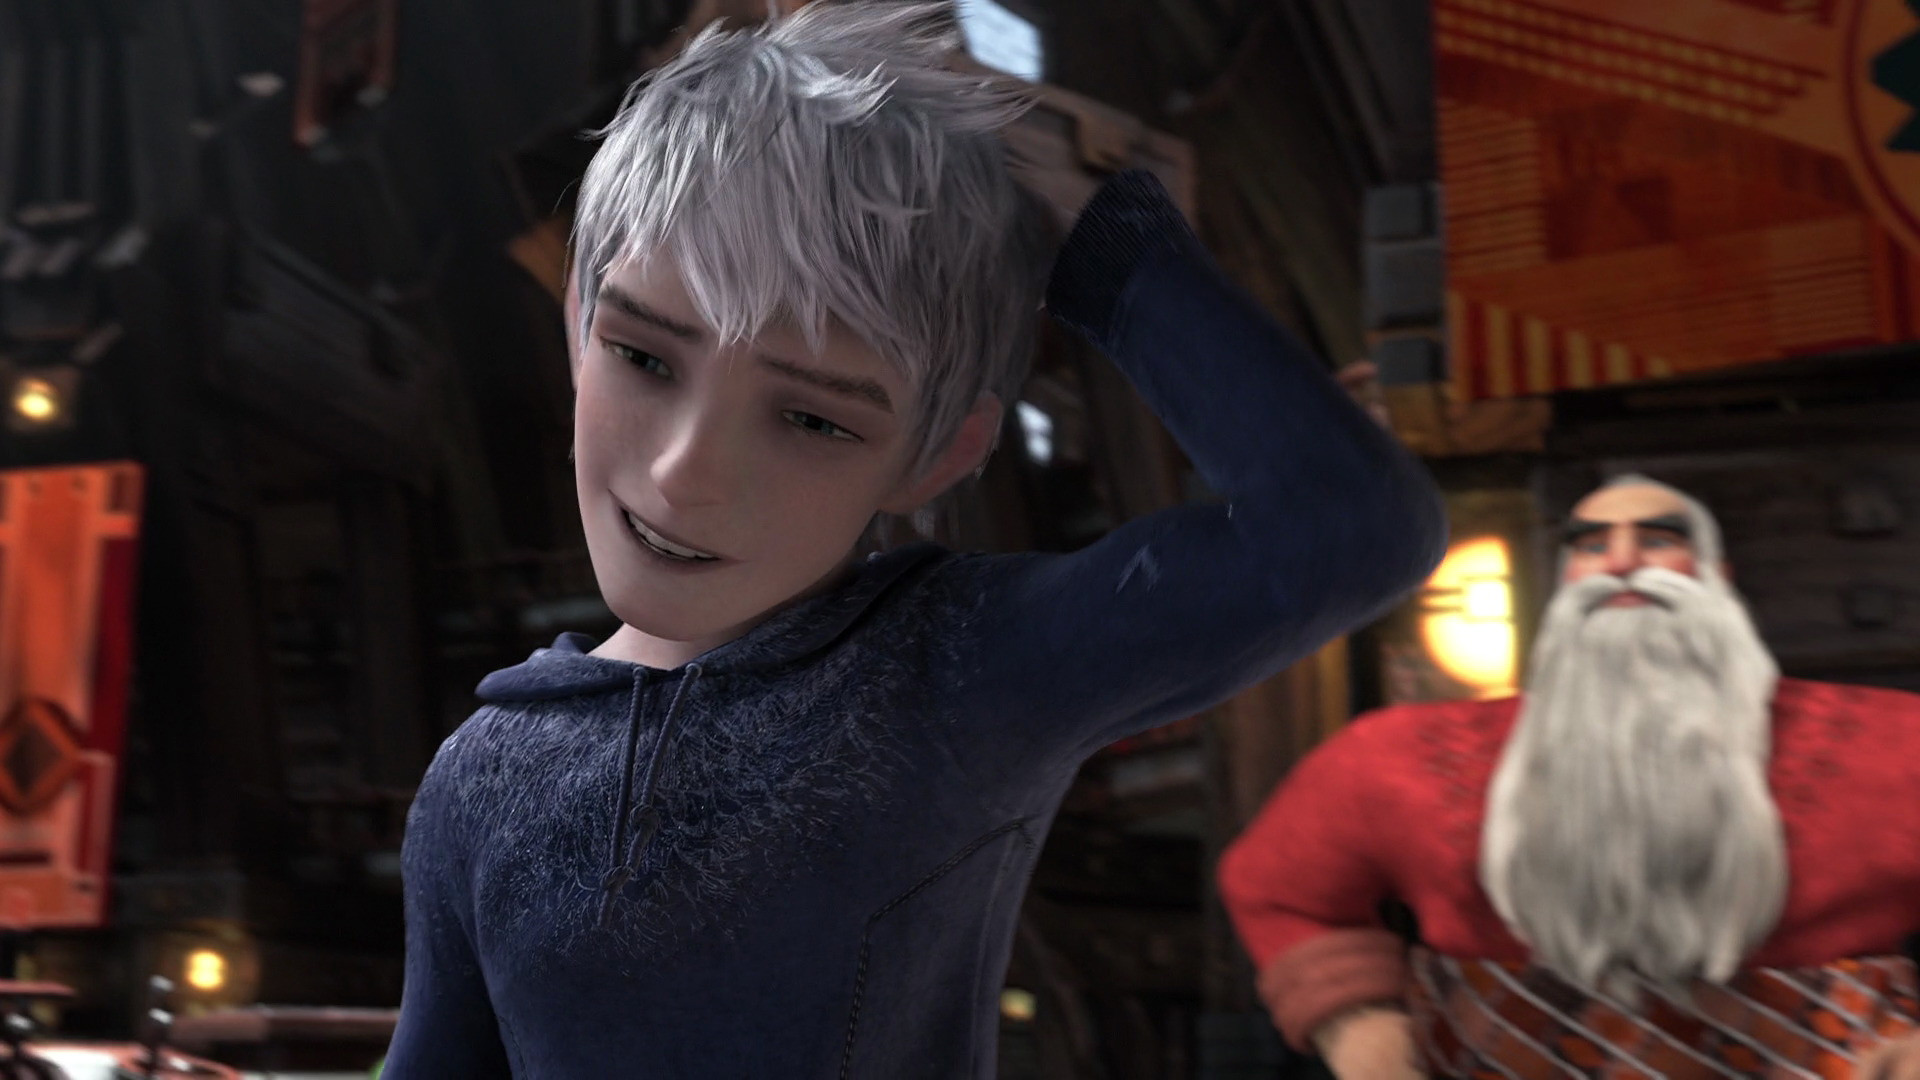 1920x1080 rise of the guardians 2 Quotes